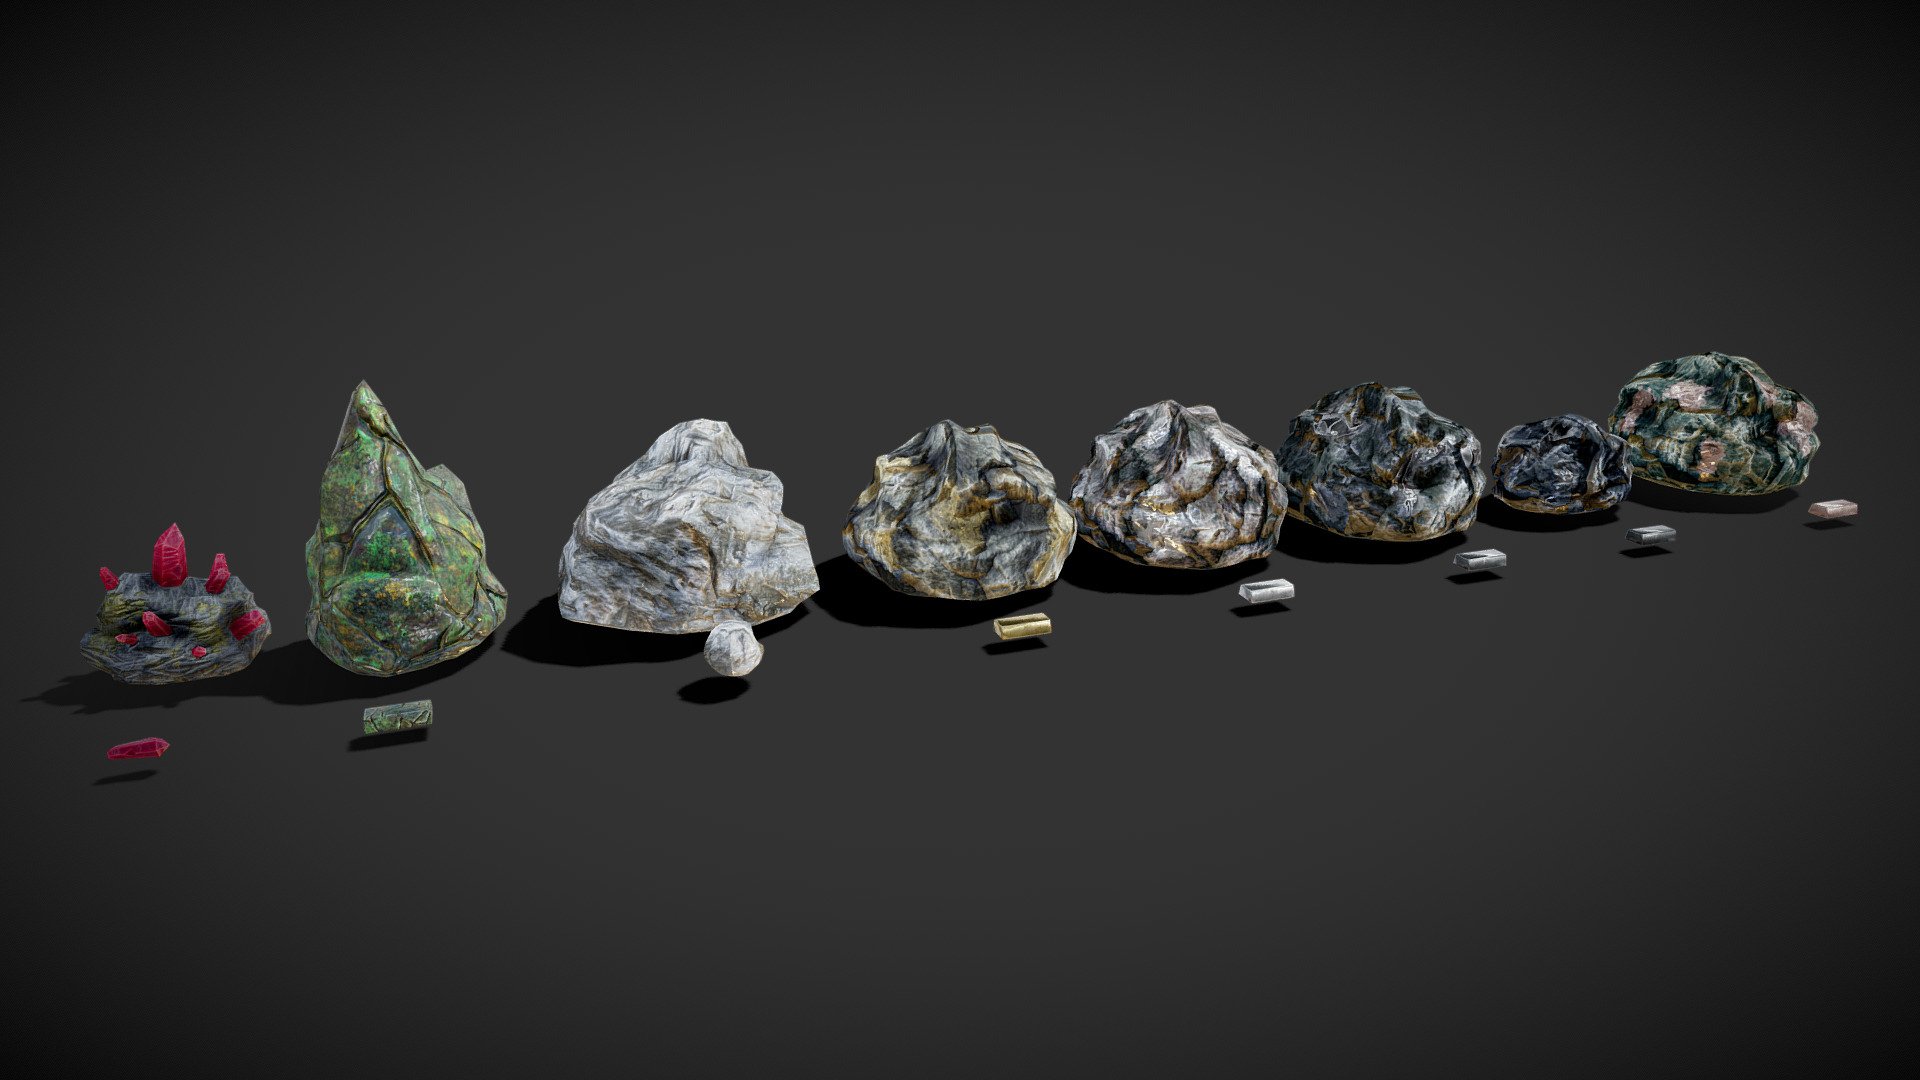 RaR file content : Fbx and Obj files and 4k textures for unity5 and UnrealEngine4.
Gem Ore: 363 polys , 445 verts.
Rare Ore: 252 polys , 254 verts.
Stone node: 196 polys , 198 verts.
Common ores: 472 polys, 474 verts.
Tin ore: 475 polys, 474 verts.

Gem ingot: 24 polys , 28 verts.
Common and rare ingot: 62 polys , 56 verts.
Boulder: 142 polys , 144 verts.

Sketchfab viewport textures are less than 4k due to the sketchfab upload cap 3d model